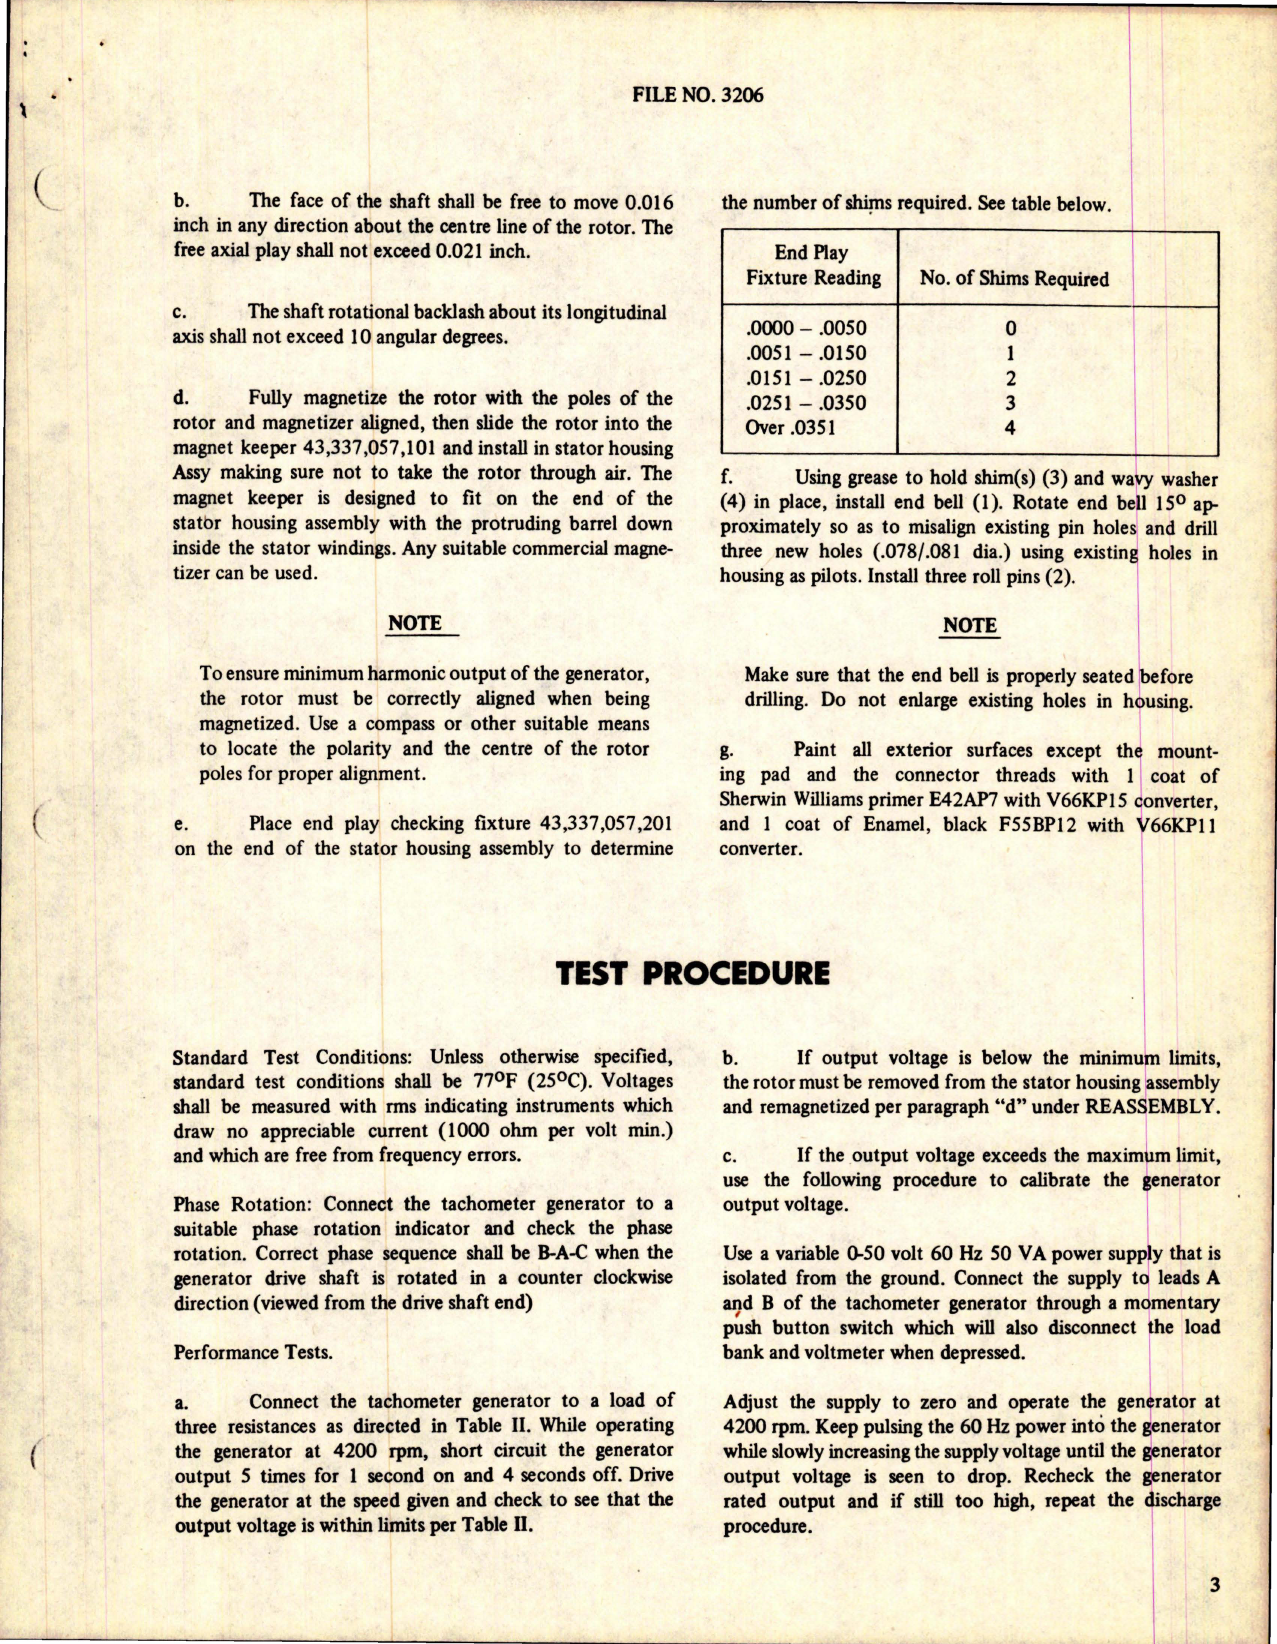 Sample page 5 from AirCorps Library document: Overhaul Instructions with Parts -  for Tachometer Generator - Amendment 1 - Models 32005-007 and 32005-008 